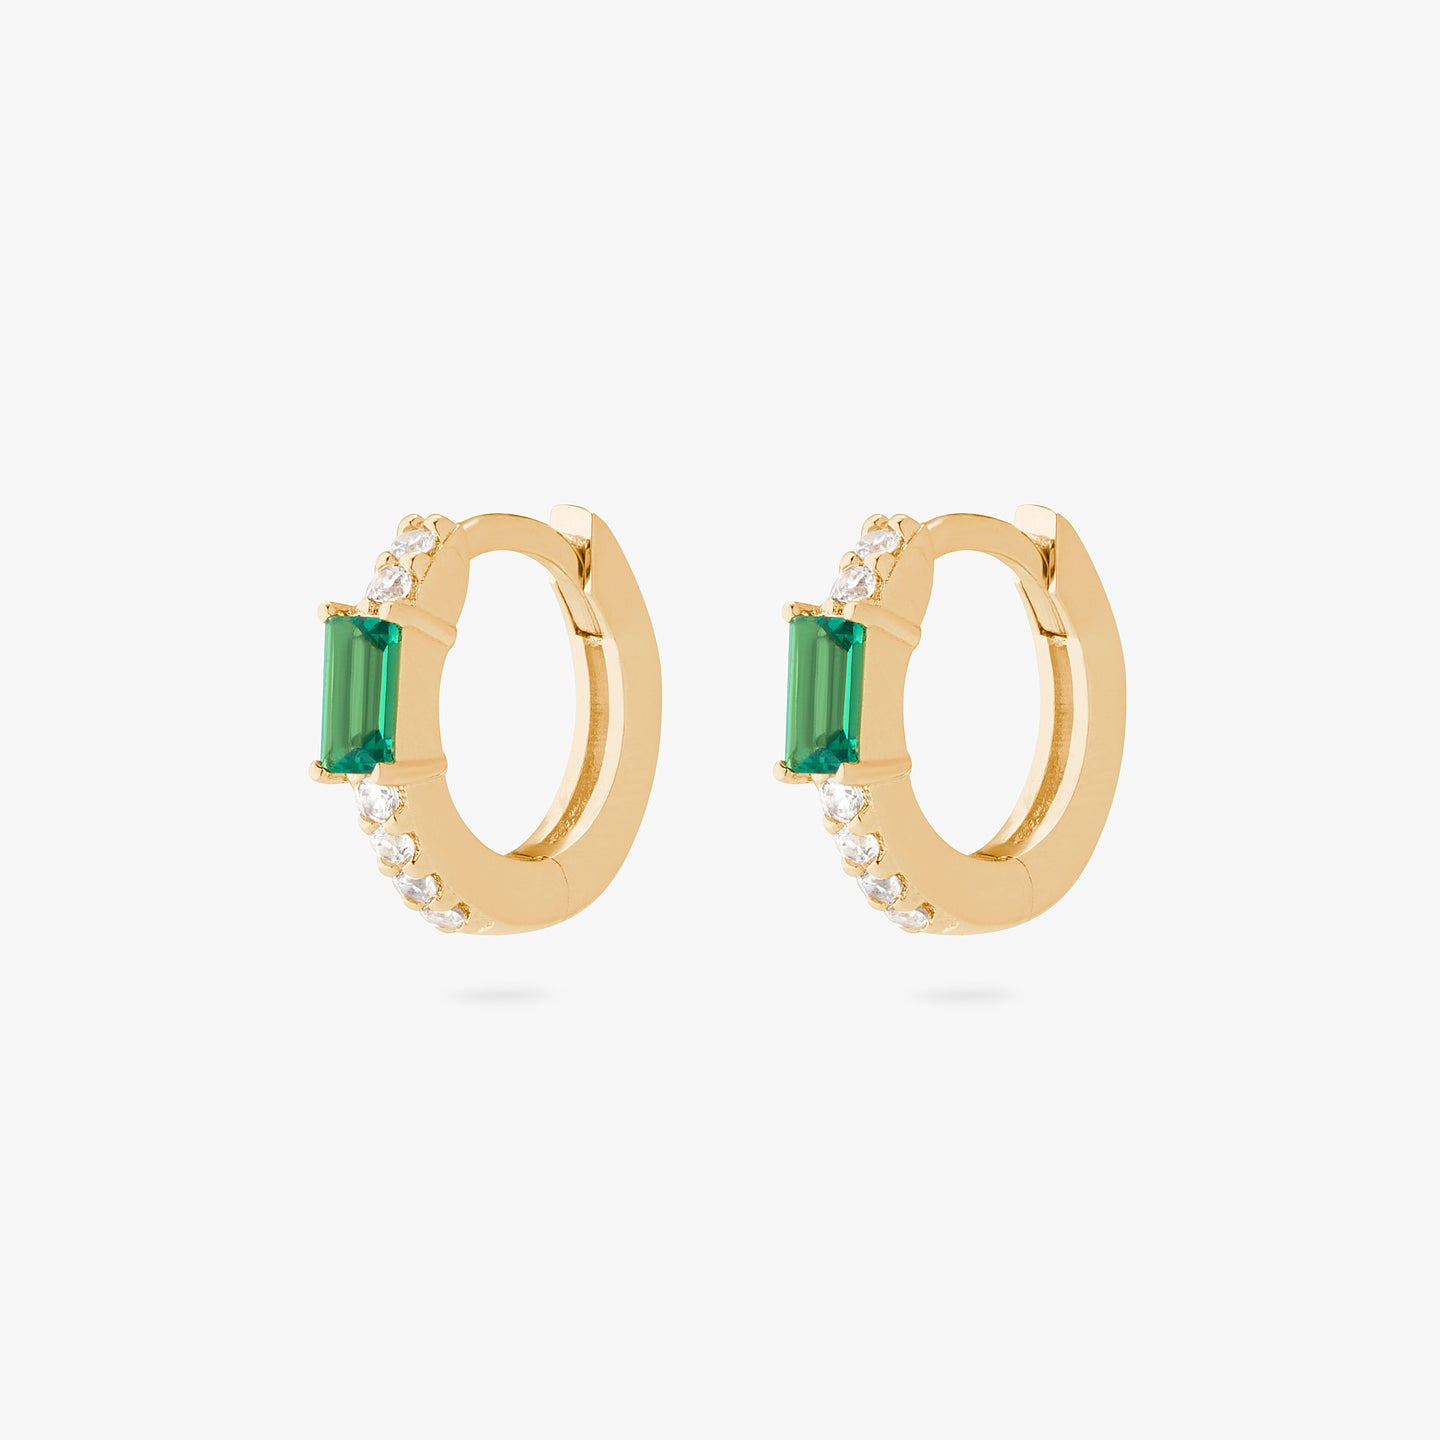 An image of a pair of gold/clear huggies with green accent baguette CZ stones. [pair] color:null|gold/green